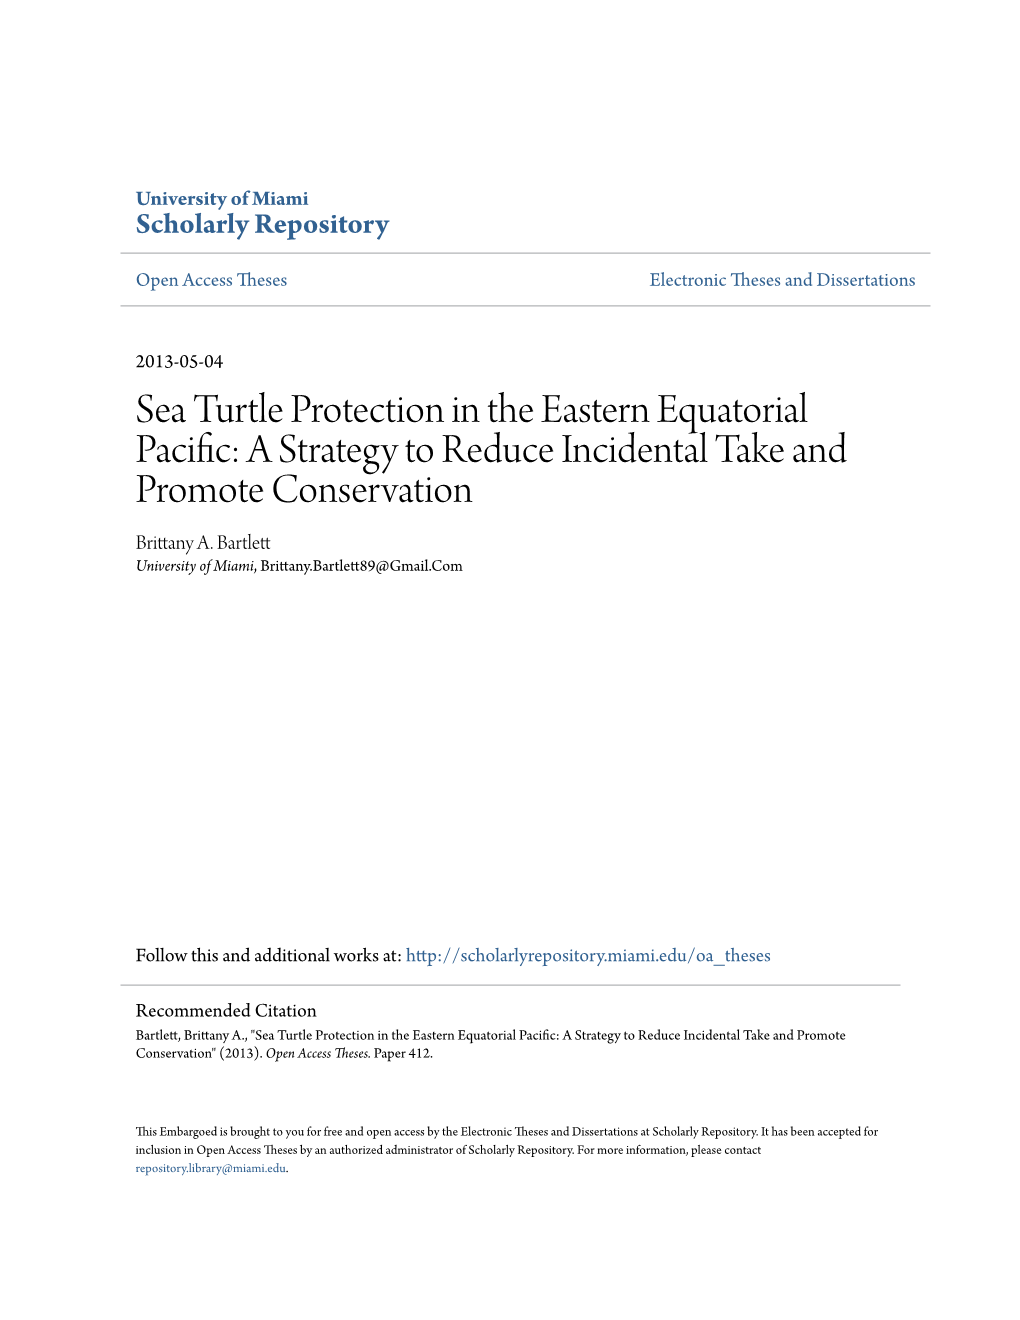 Sea Turtle Protection in the Eastern Equatorial Pacific: a Trs Ategy to Reduce Incidental Take and Promote Conservation Brittany A